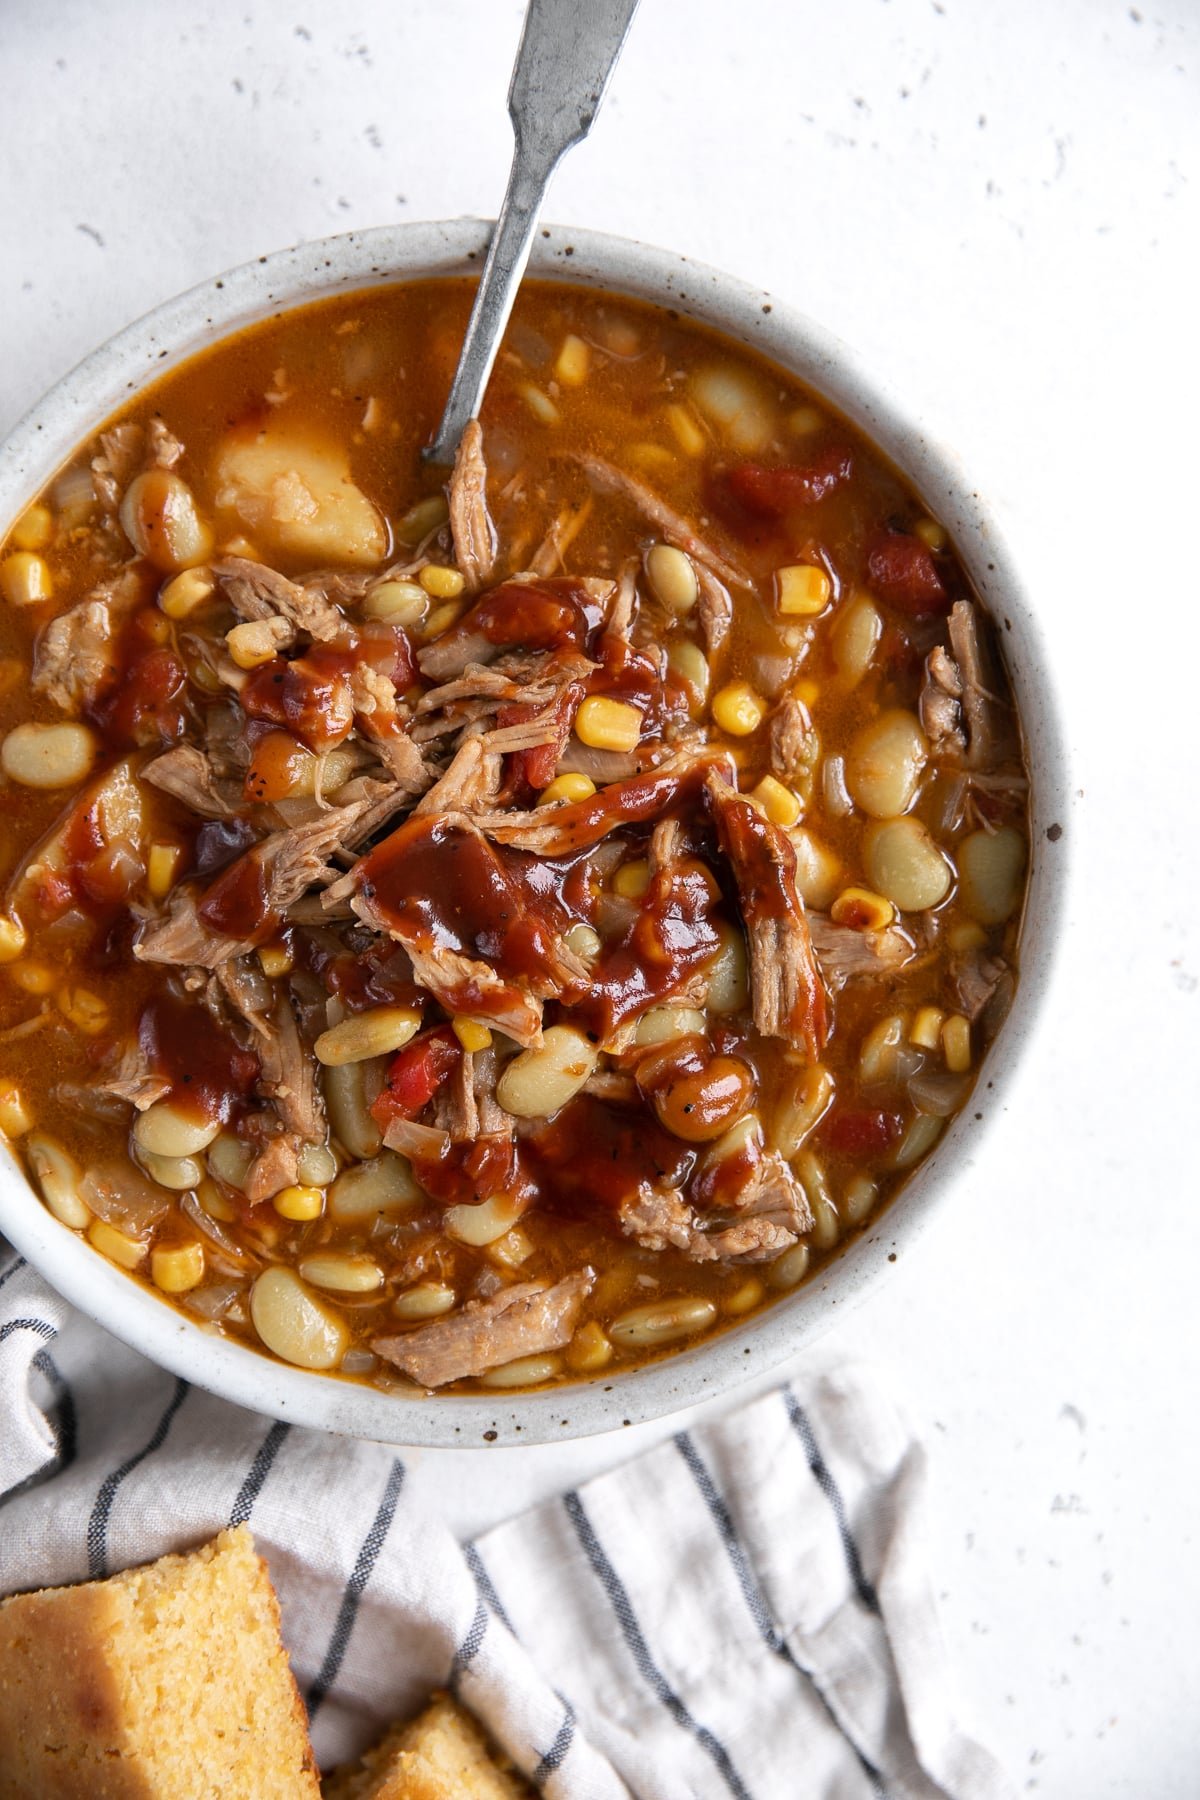 Over head image of a bowl filled with Brunswick stew and served with a side of freshly baked cornbread.